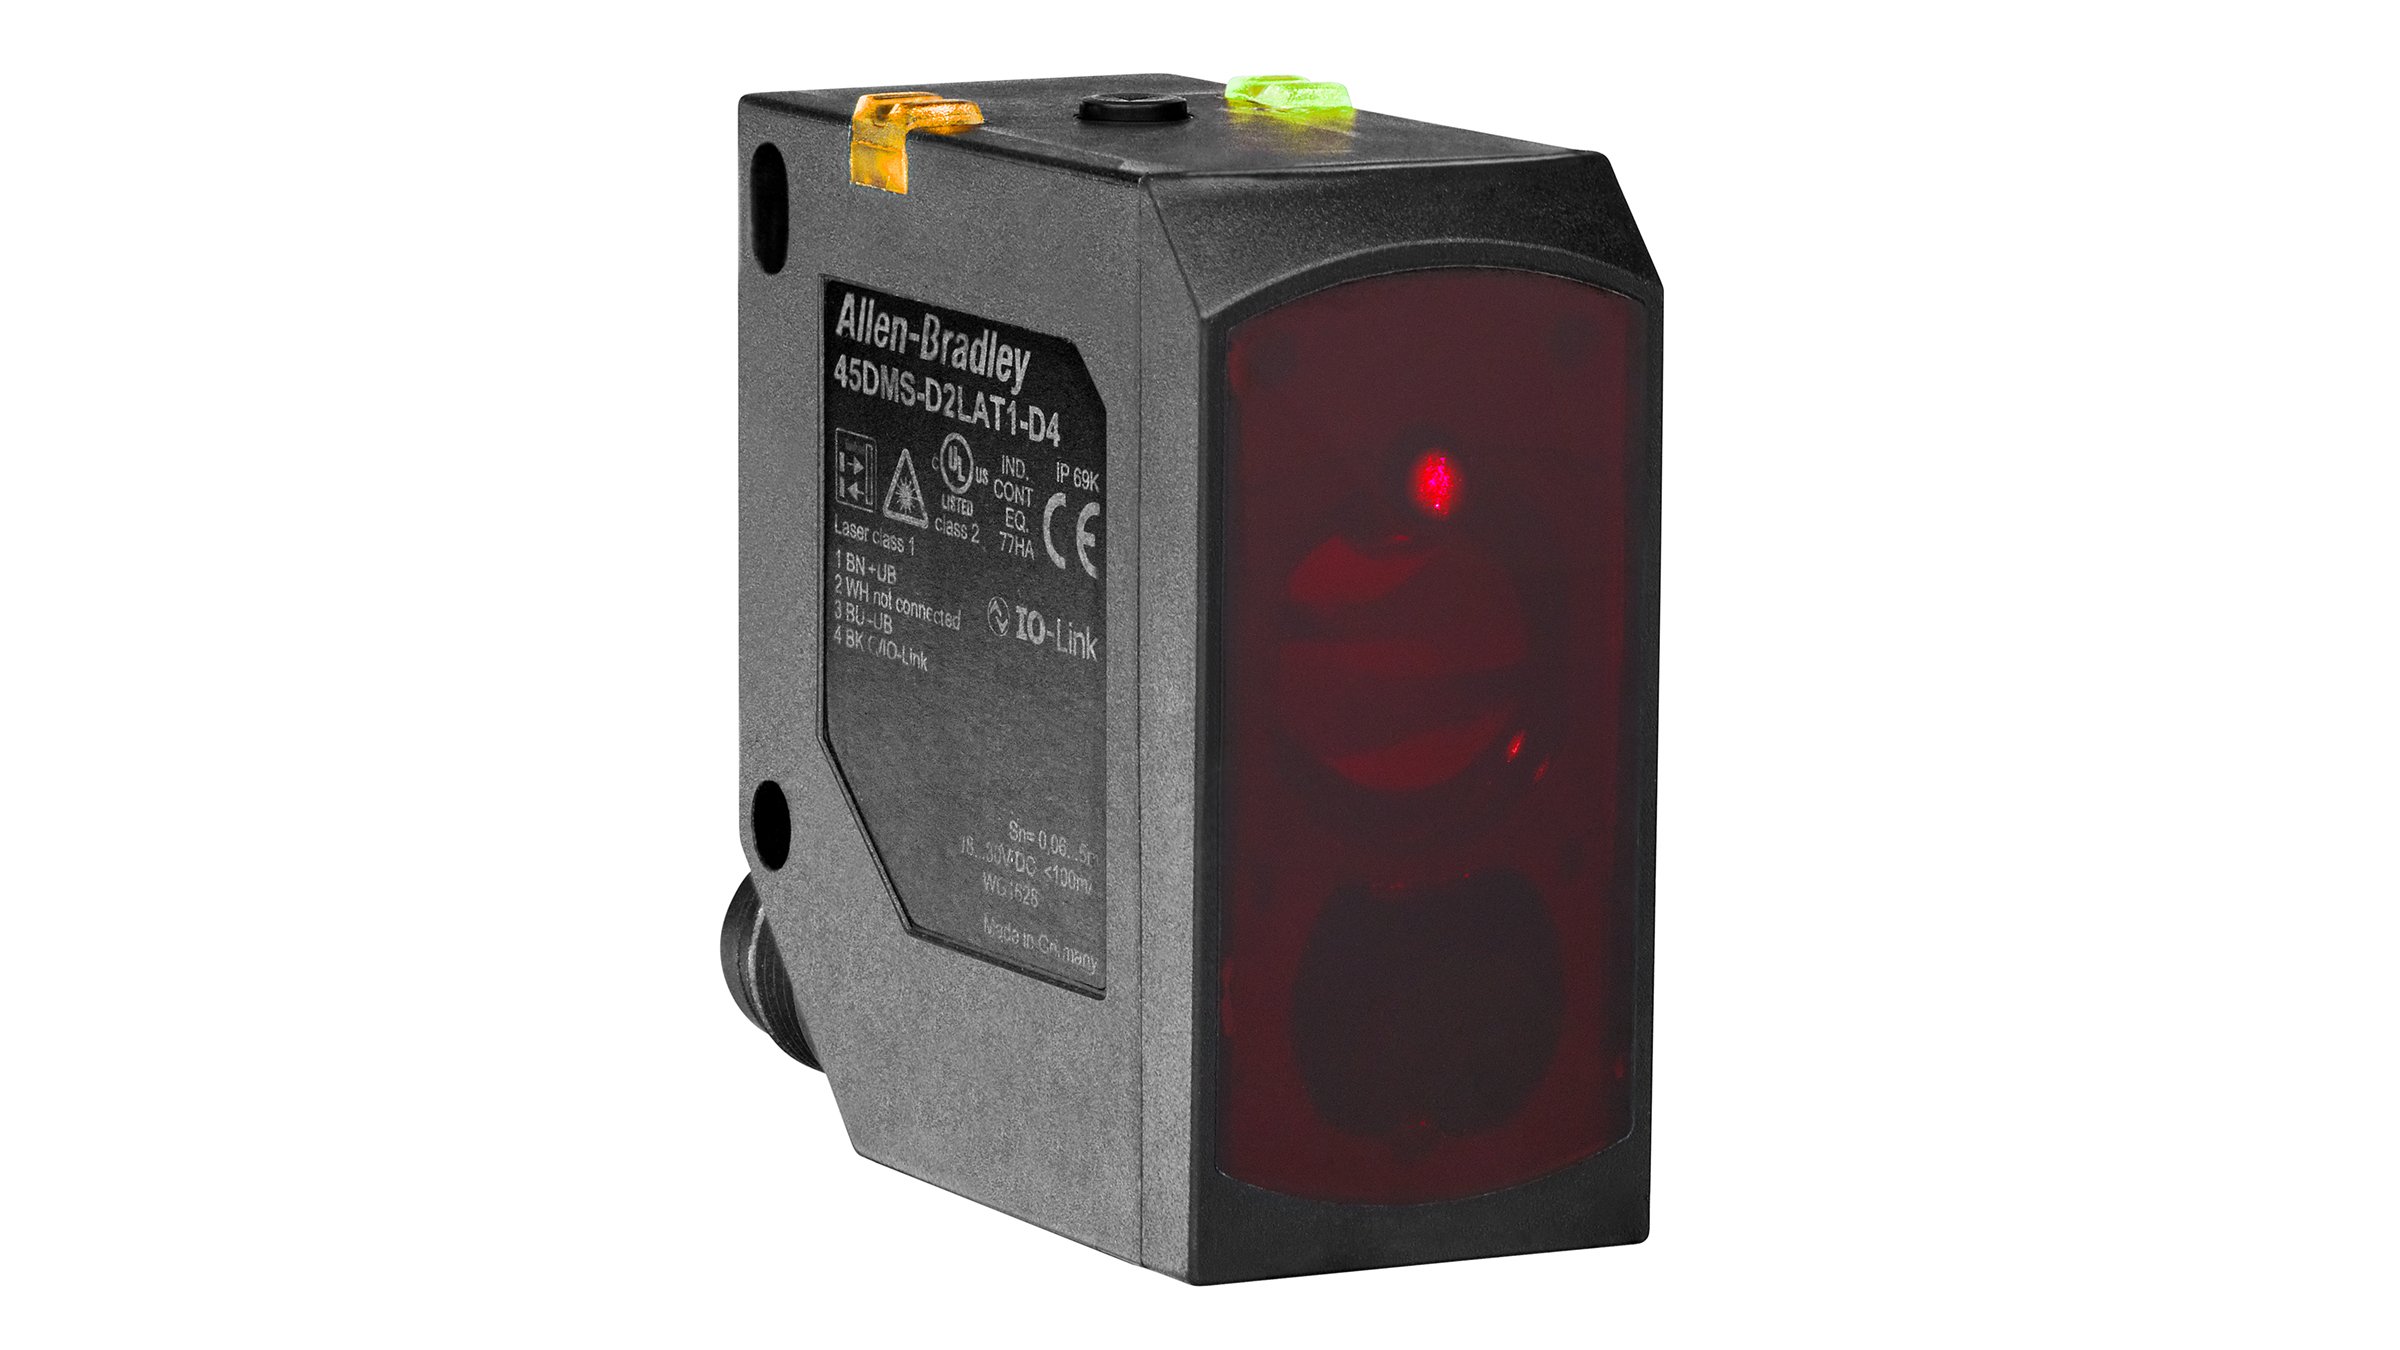 Allen-Bradley black rectangular sensor with a red lens and yellow and green LED indication on top.